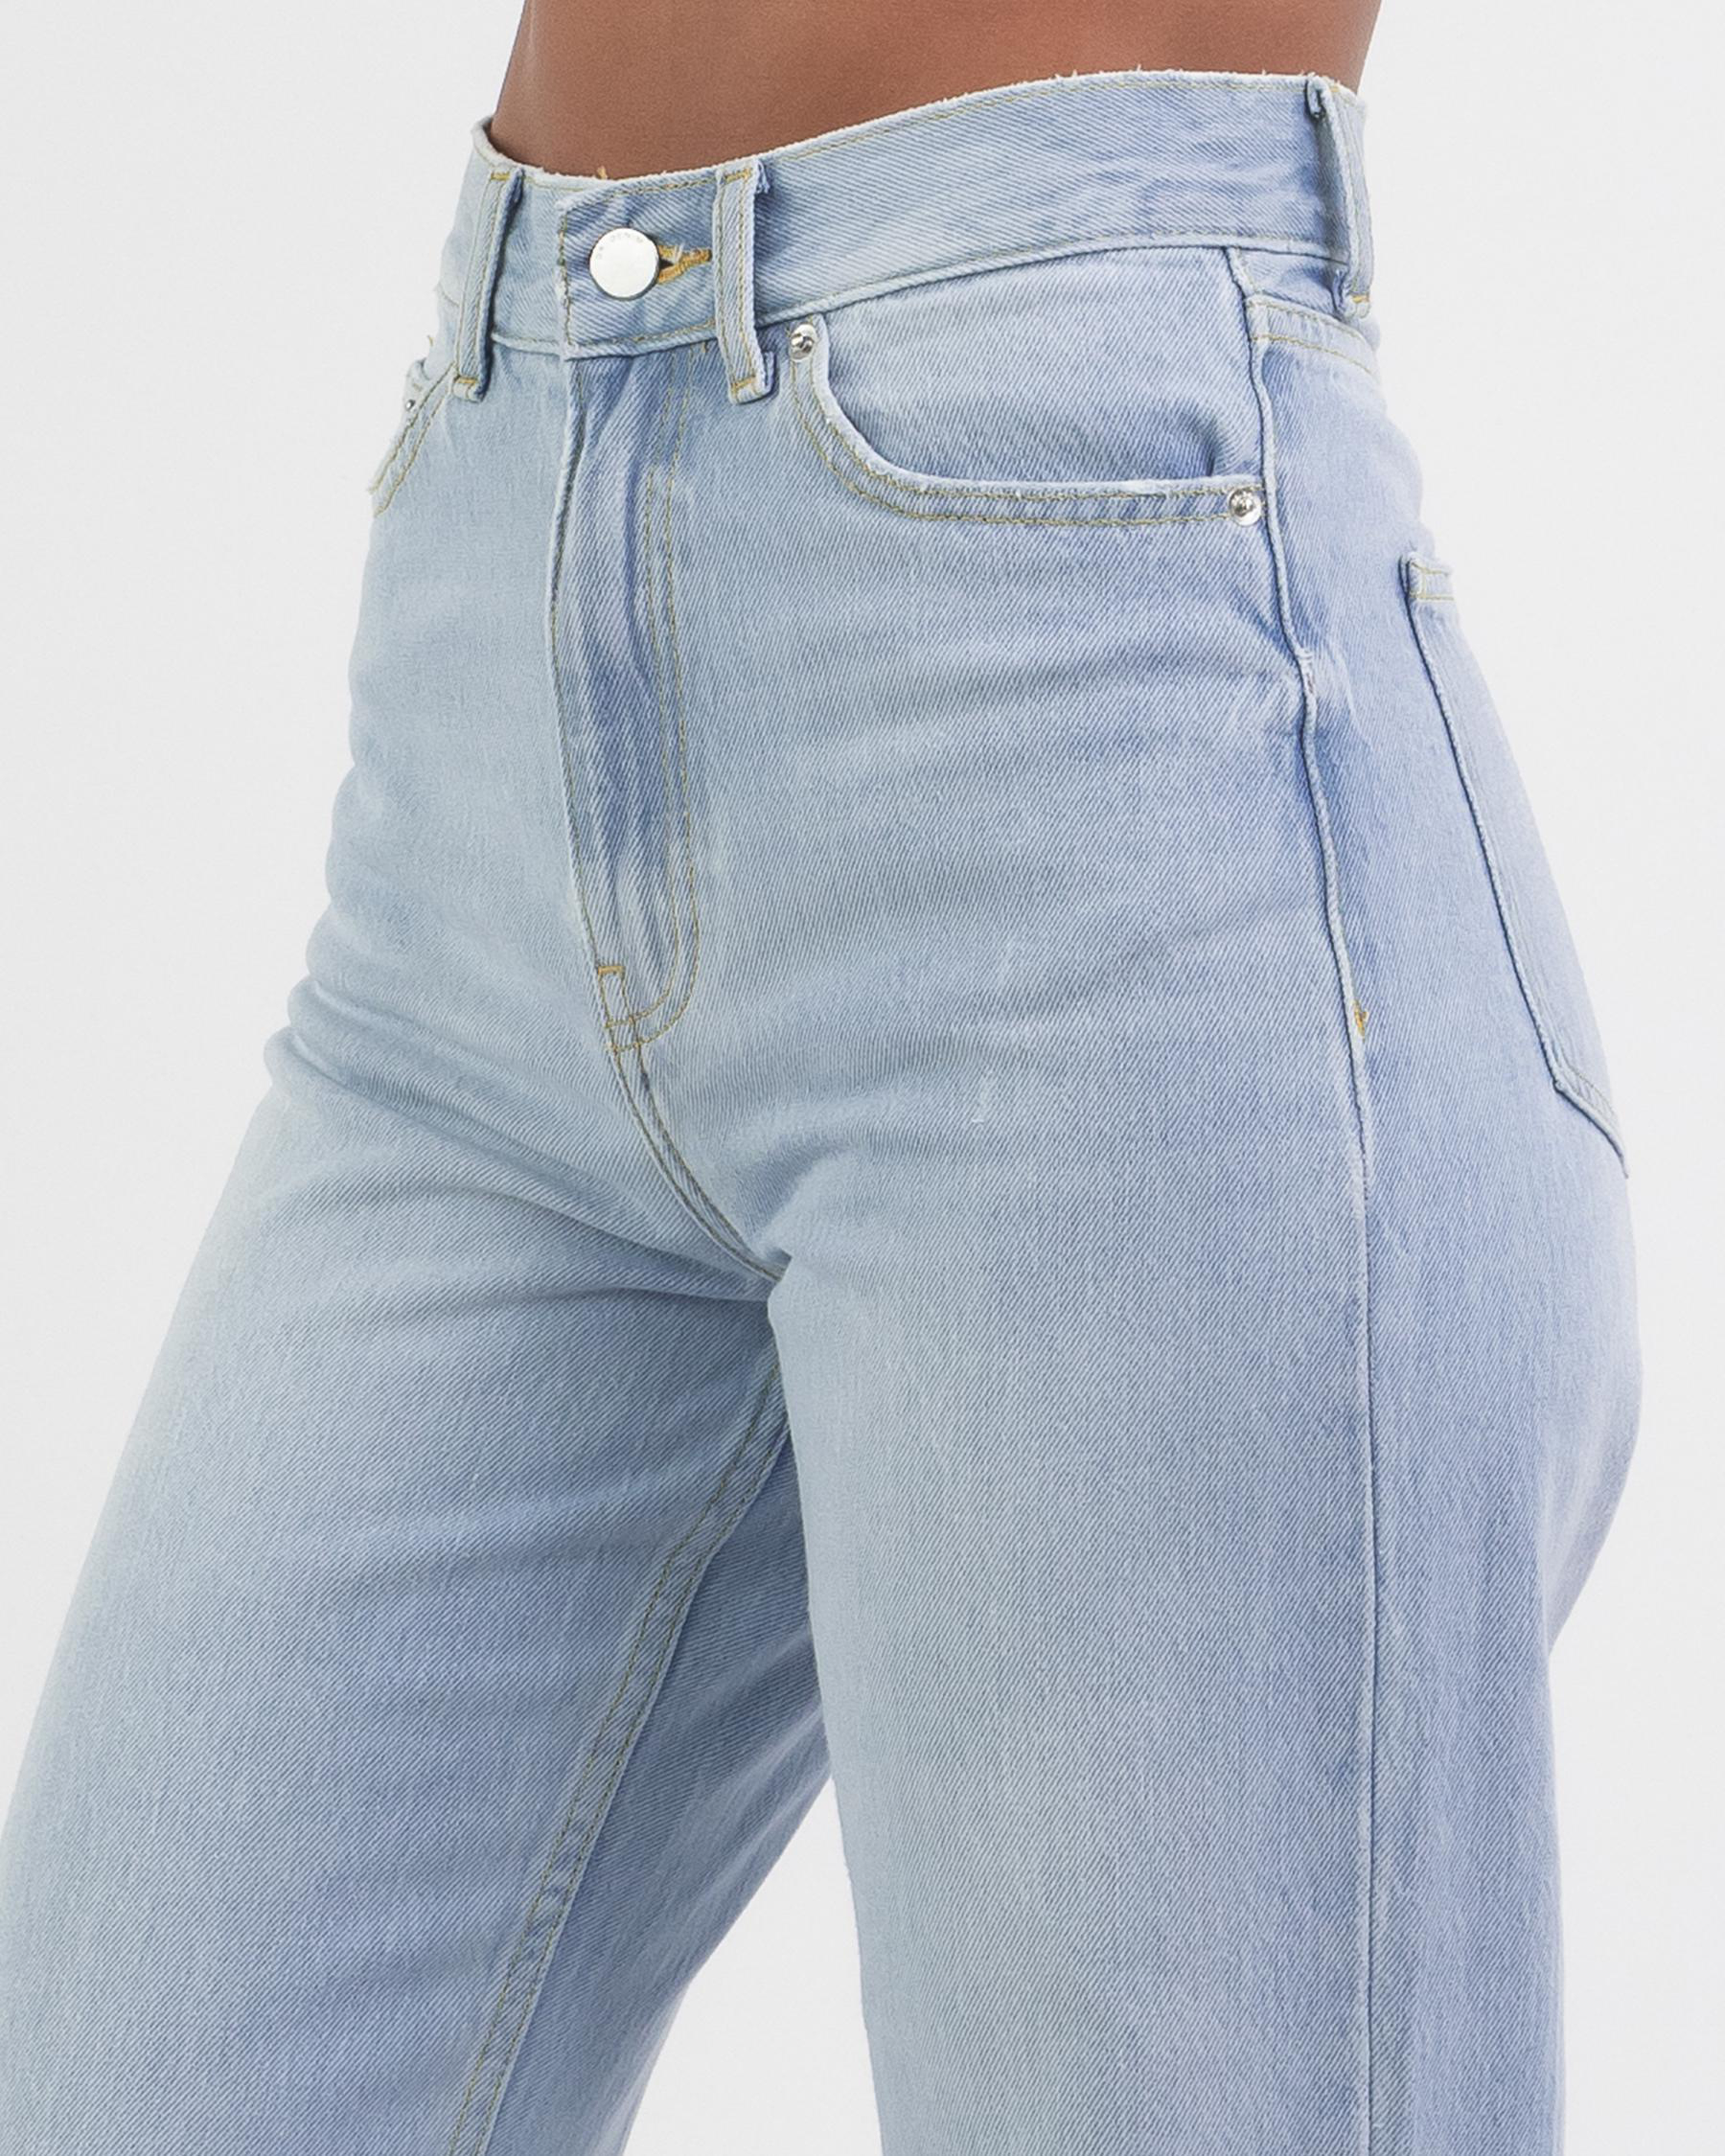 Shop Dr Denim Echo Jeans In Superlight Blue Jay - Fast Shipping & Easy ...